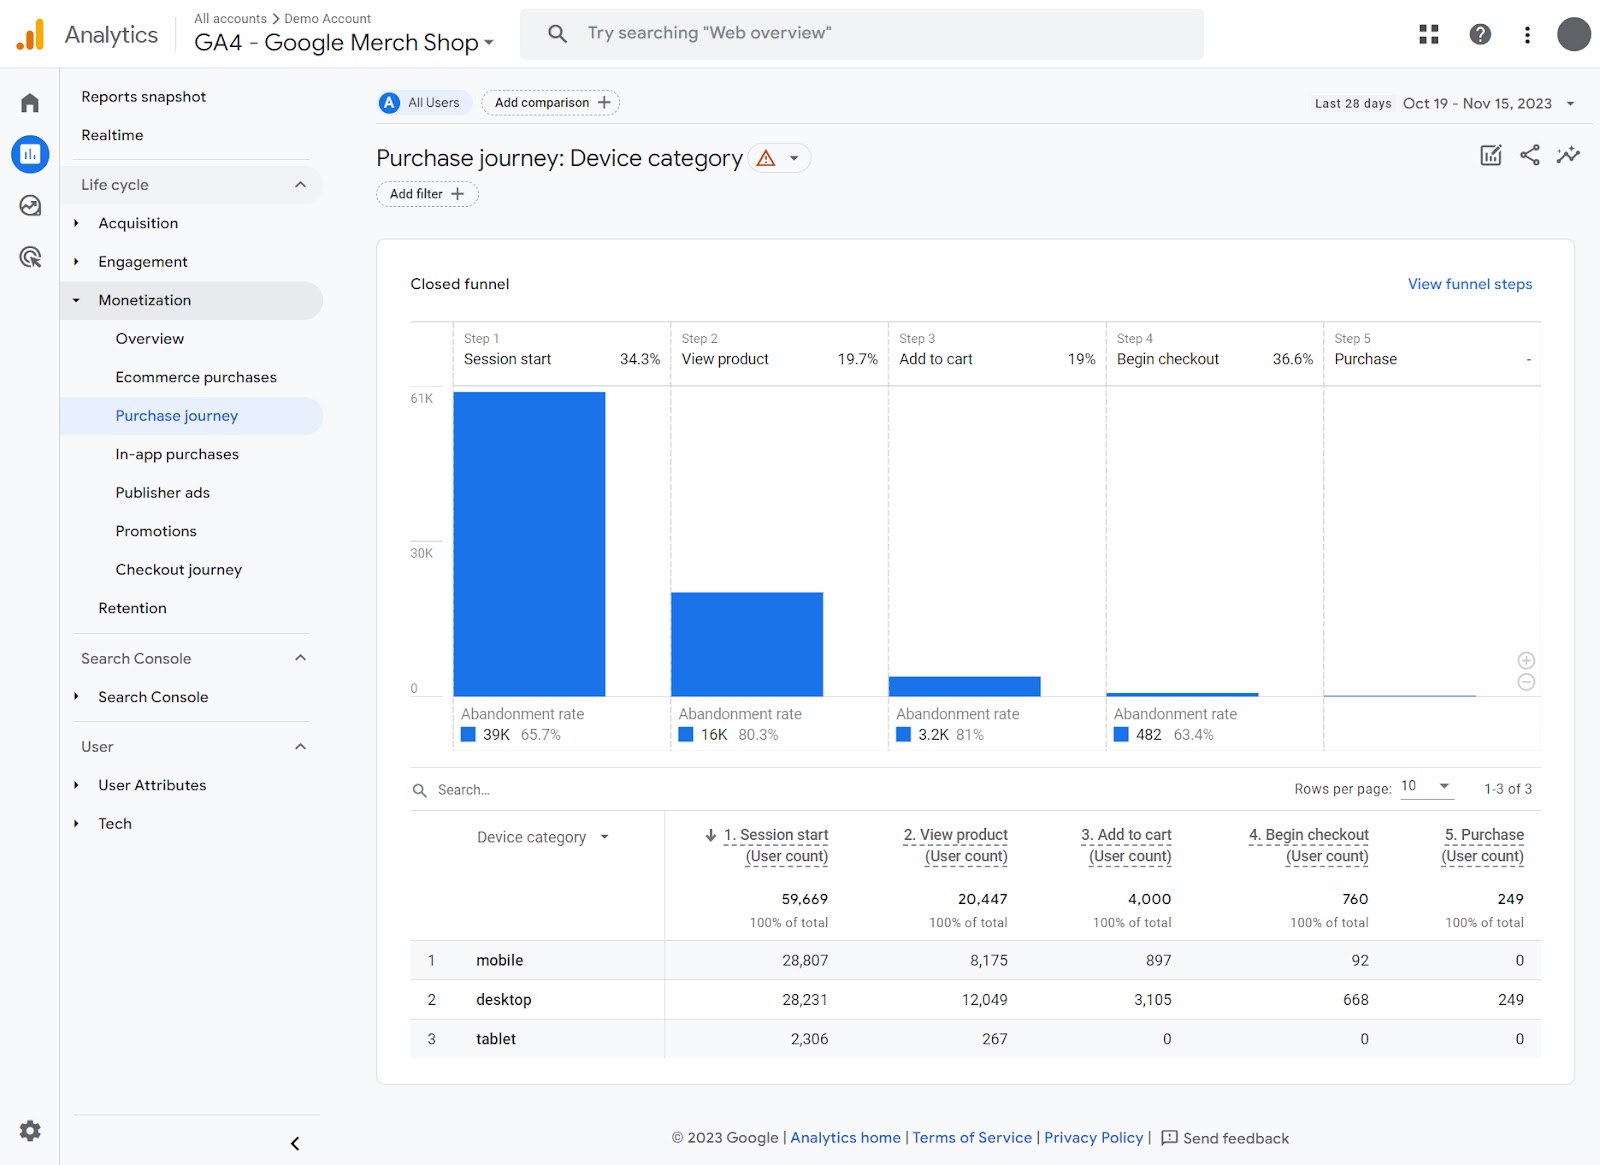 A purchase journey report from the Google Merch Shop demo account